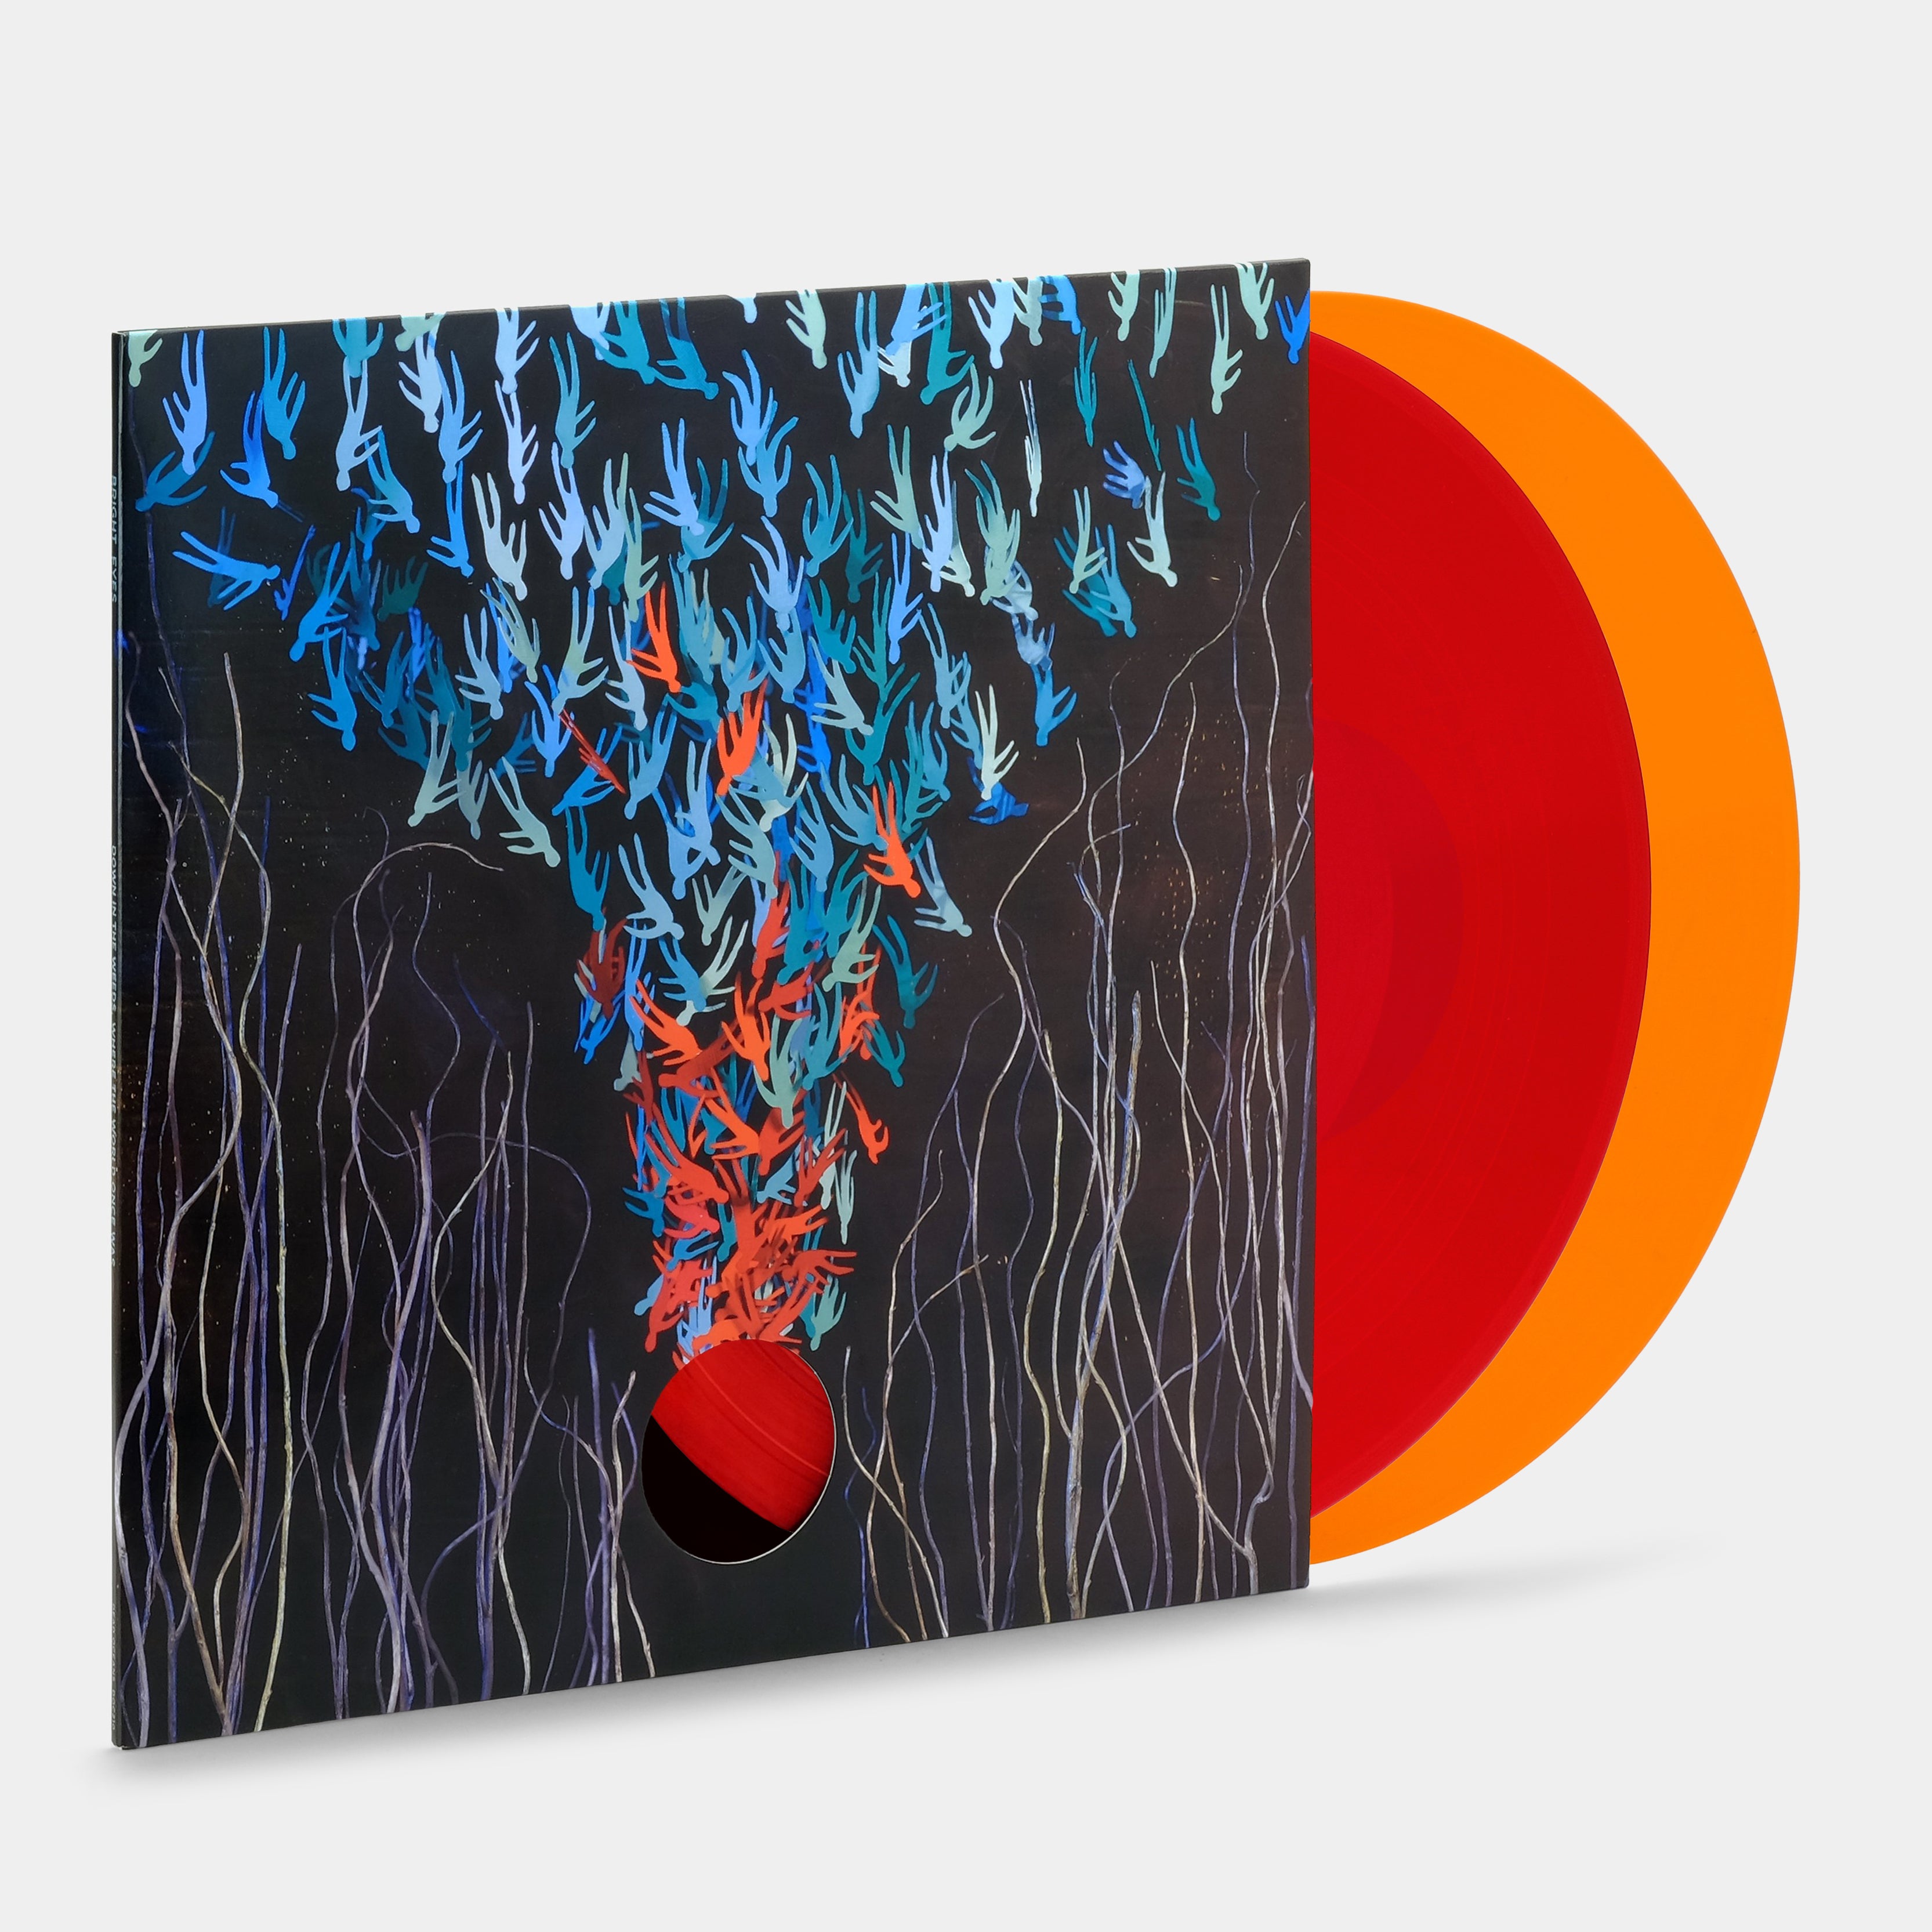 Bright Eyes - Down In The Weeds, Where The World Once Was 2xLP Orange & Red Vinyl Record